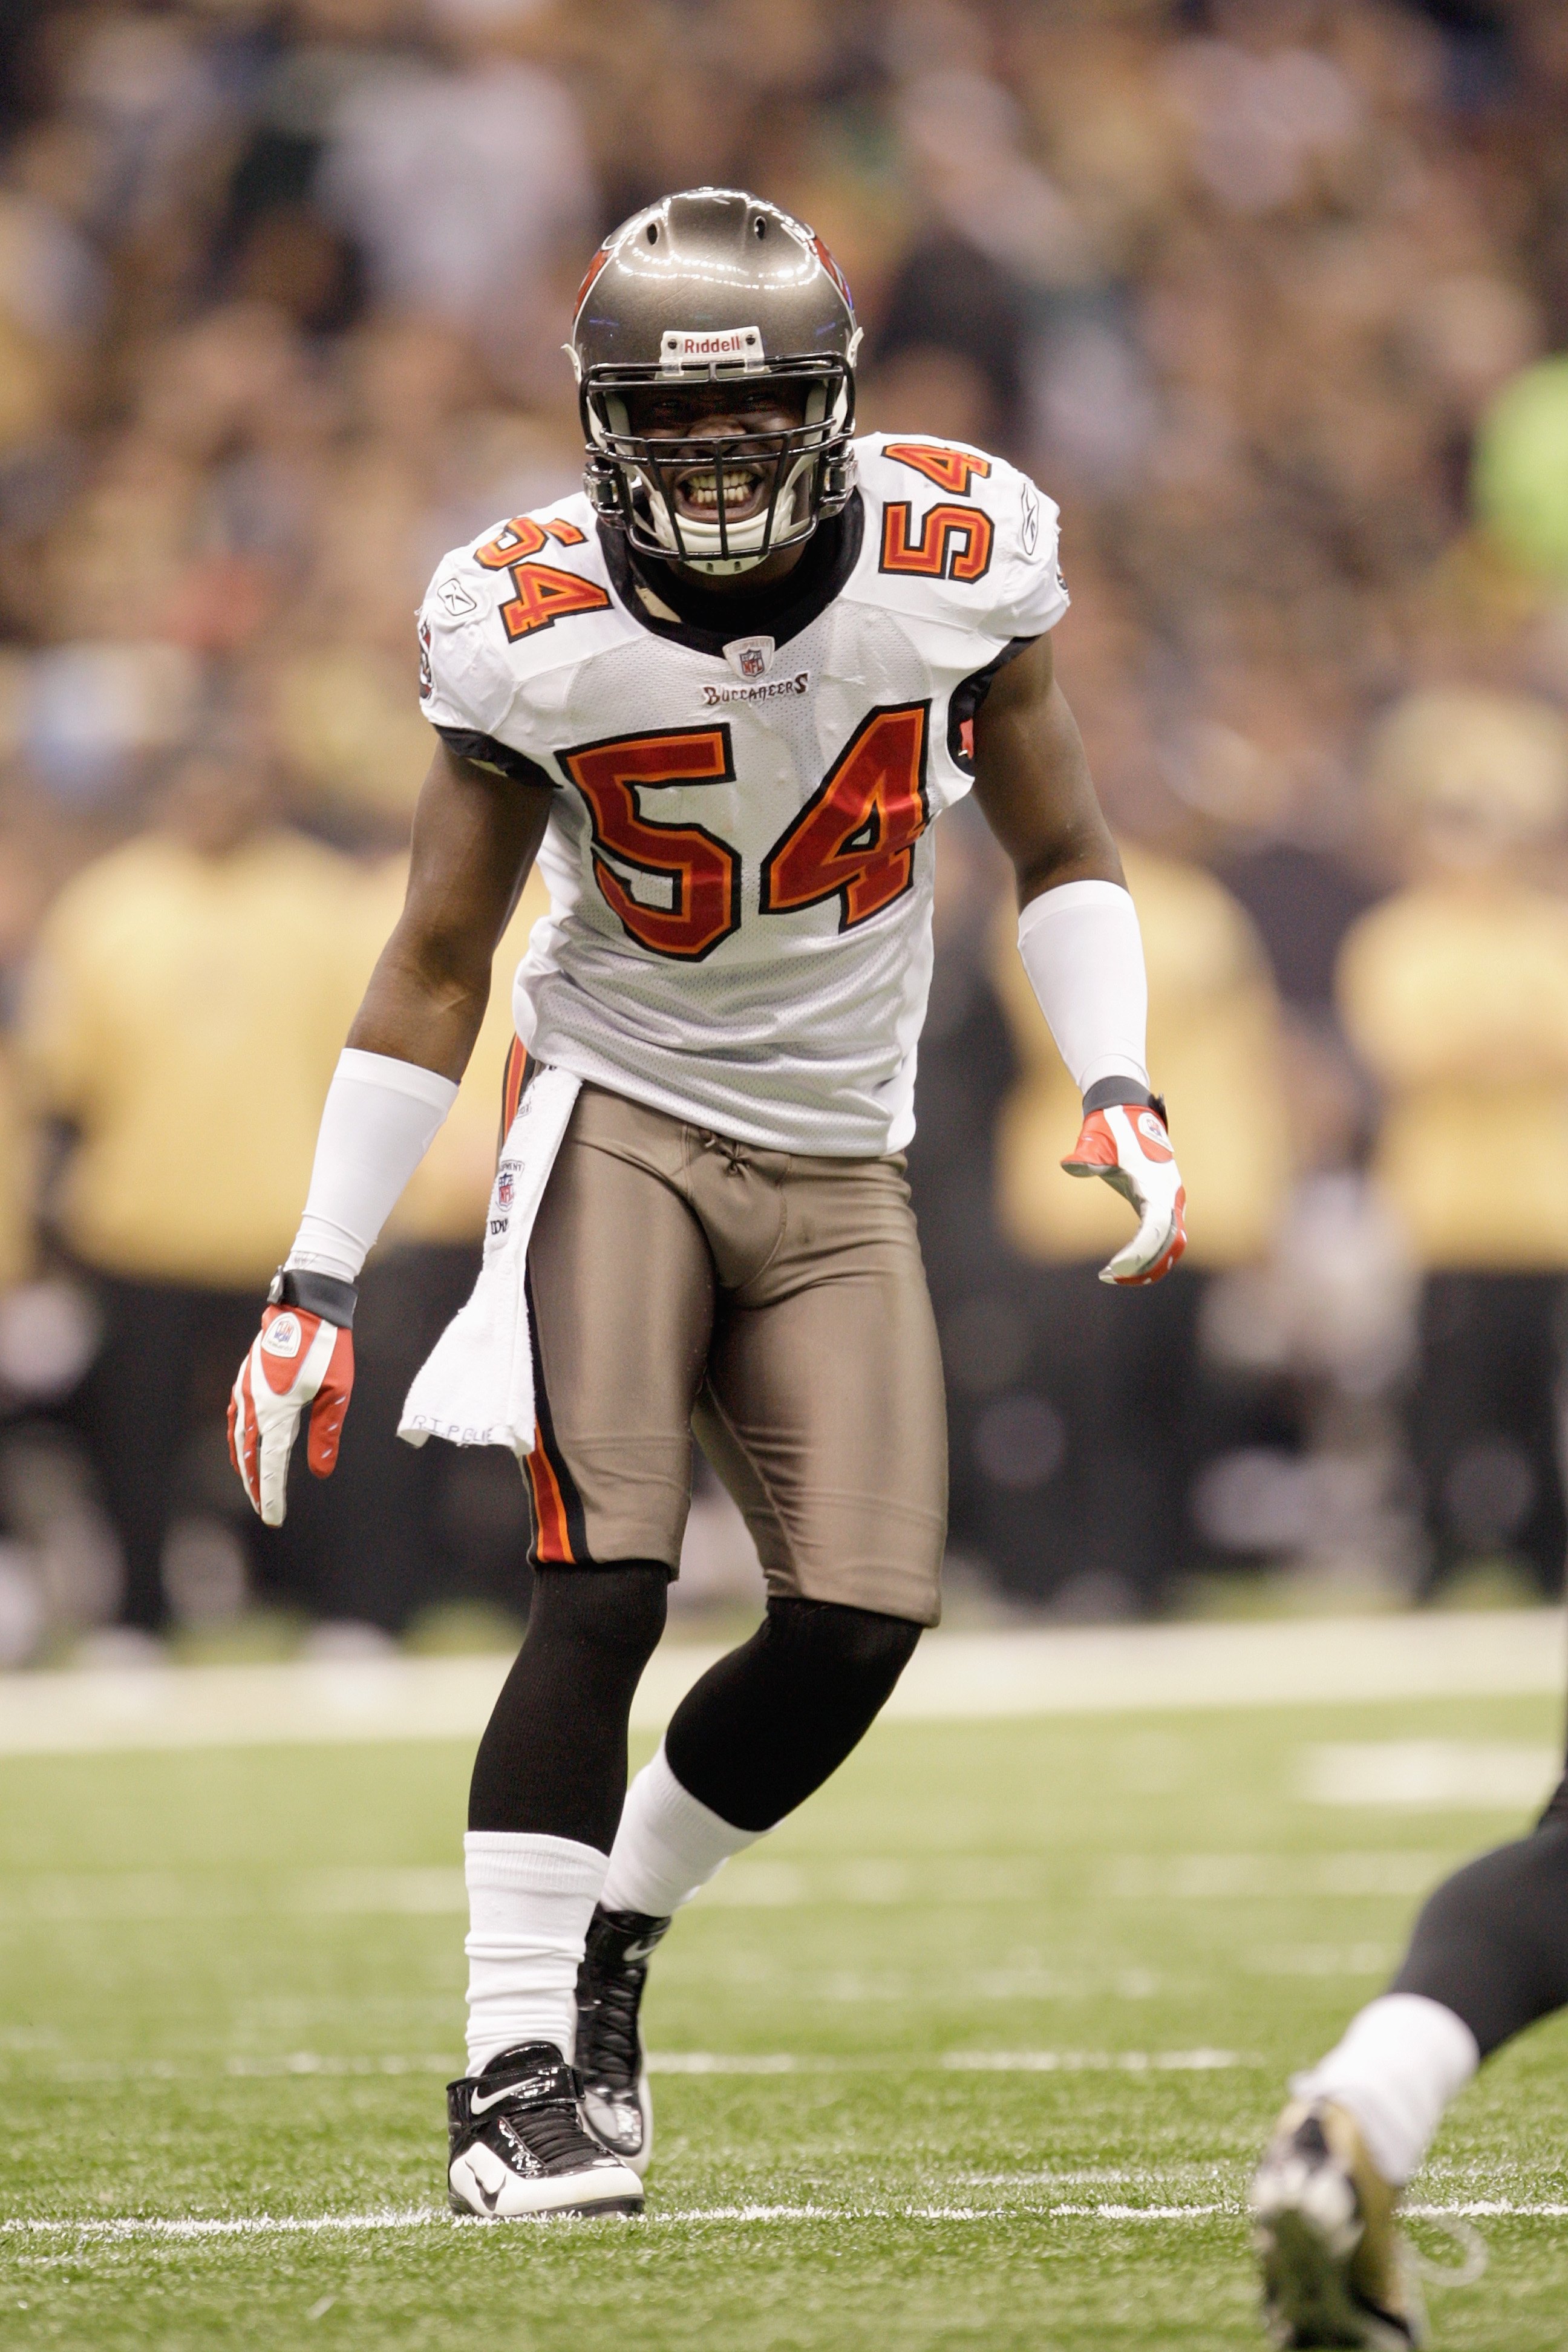 NEW ORLEANS - DECEMBER 27: Geno Hayes #54 of the Tampa Bay Buccaneers moves on the field during the game against the New Orleans Saints at the Louisiana Superdome on December 27, 2009 in New Orleans, Louisiana. (Photo by Jamie Squire/Getty Images)